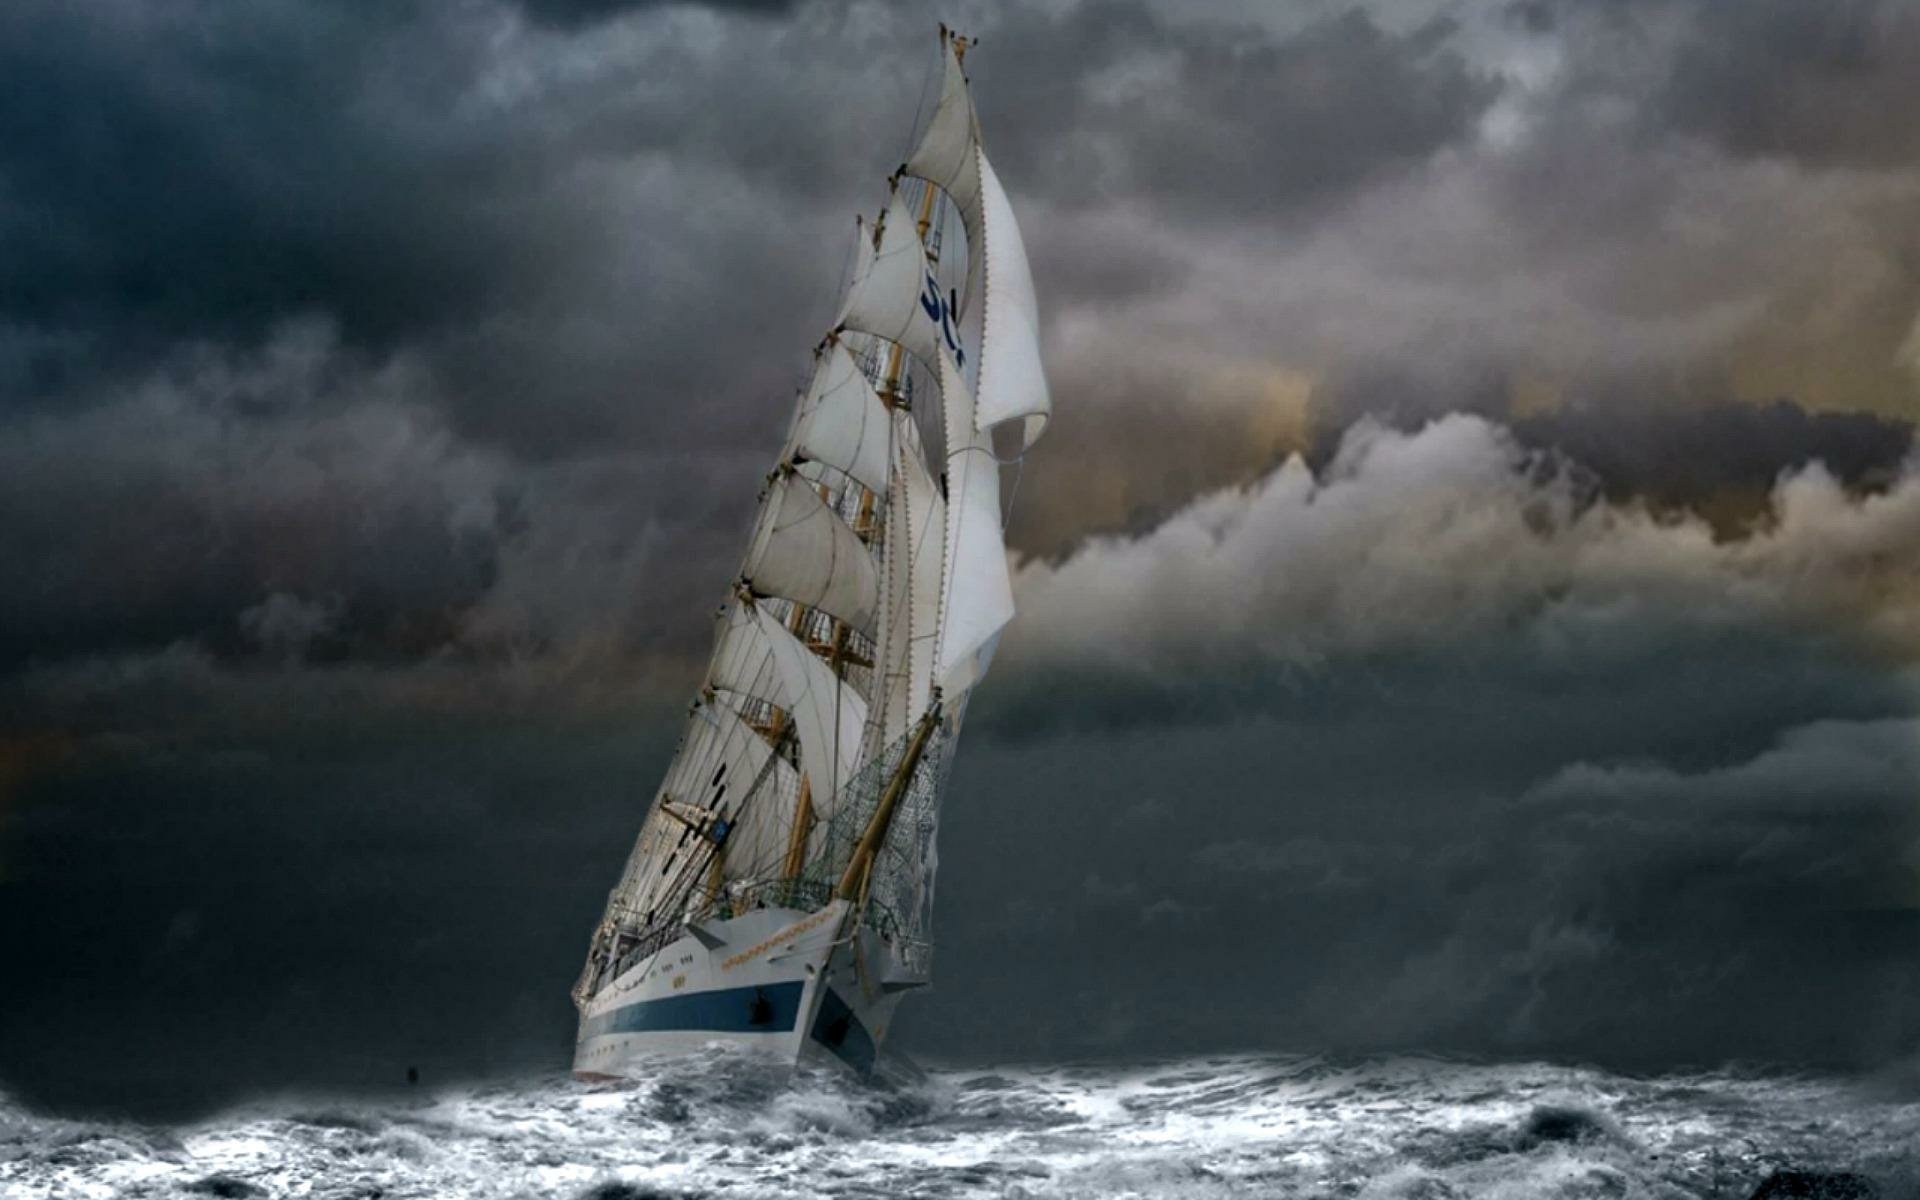 videos of sailboats in storms